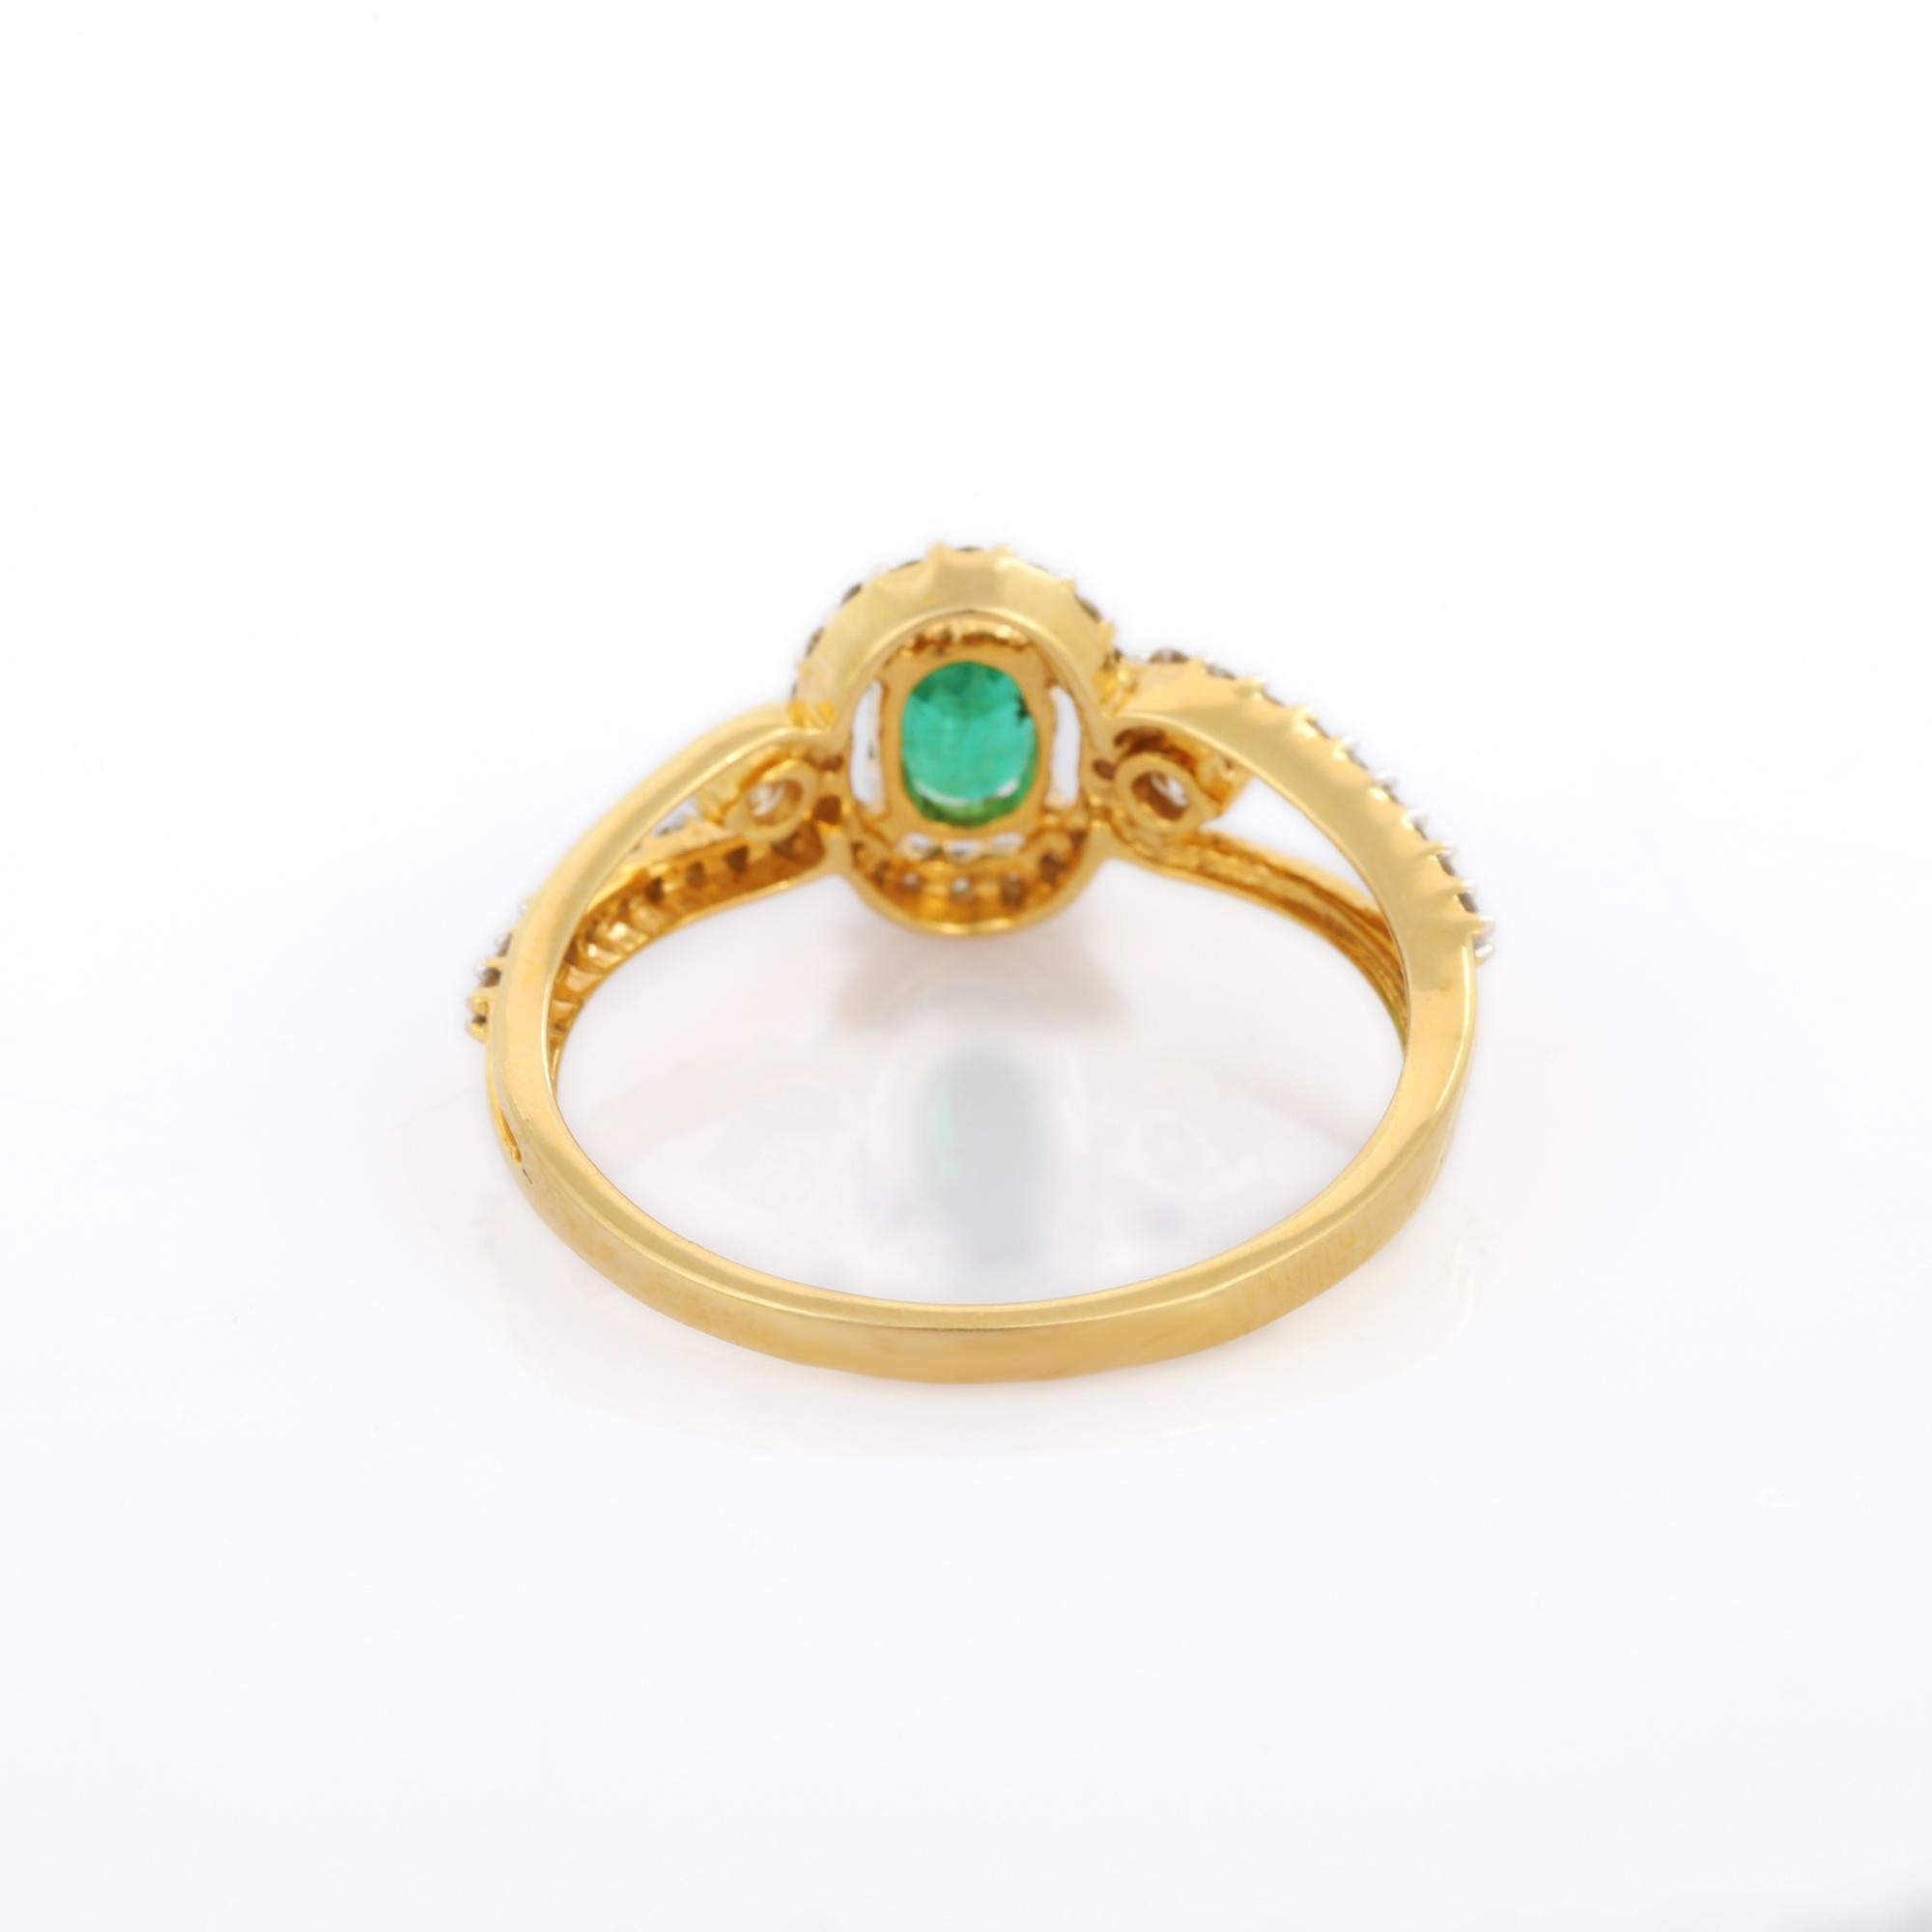 For Sale:  Solid 18k Yellow Gold Classic Emerald Engagement Ring with Diamonds 5